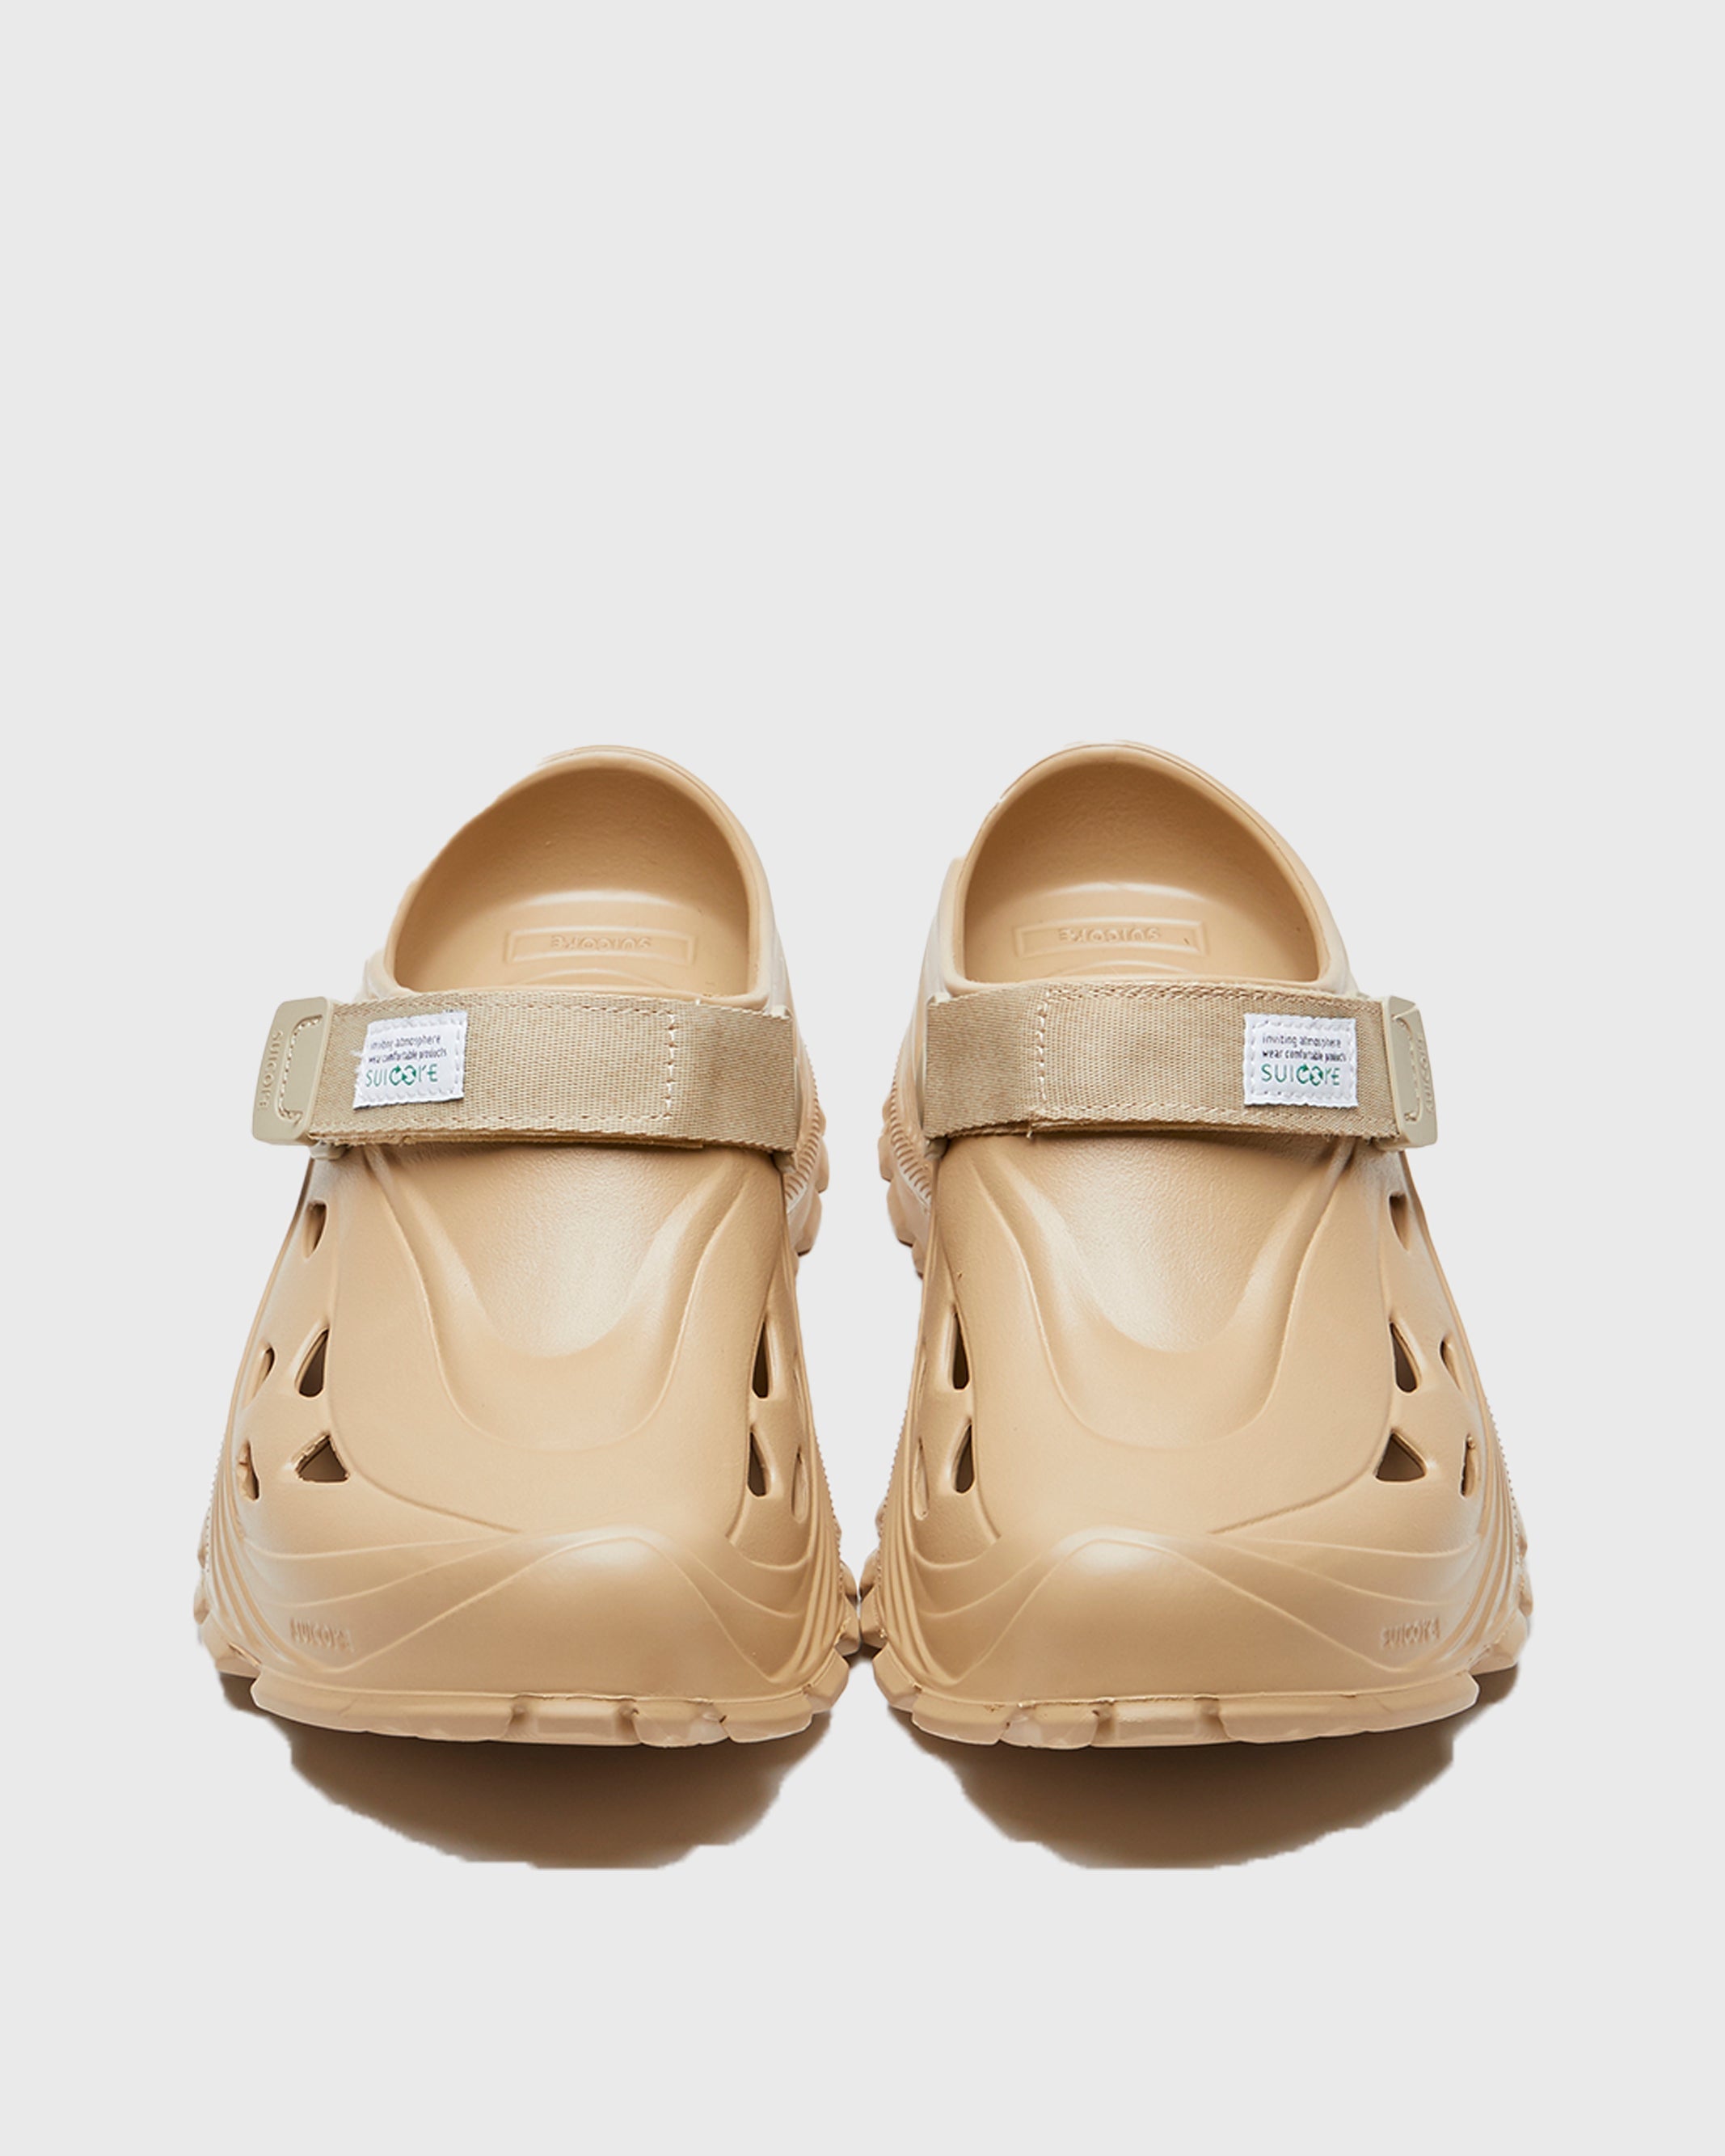 SUICOKE MOK in Beige OG-INJ101 | Shop from eightywingold an official brand partner for SUICOKE Canada and US.